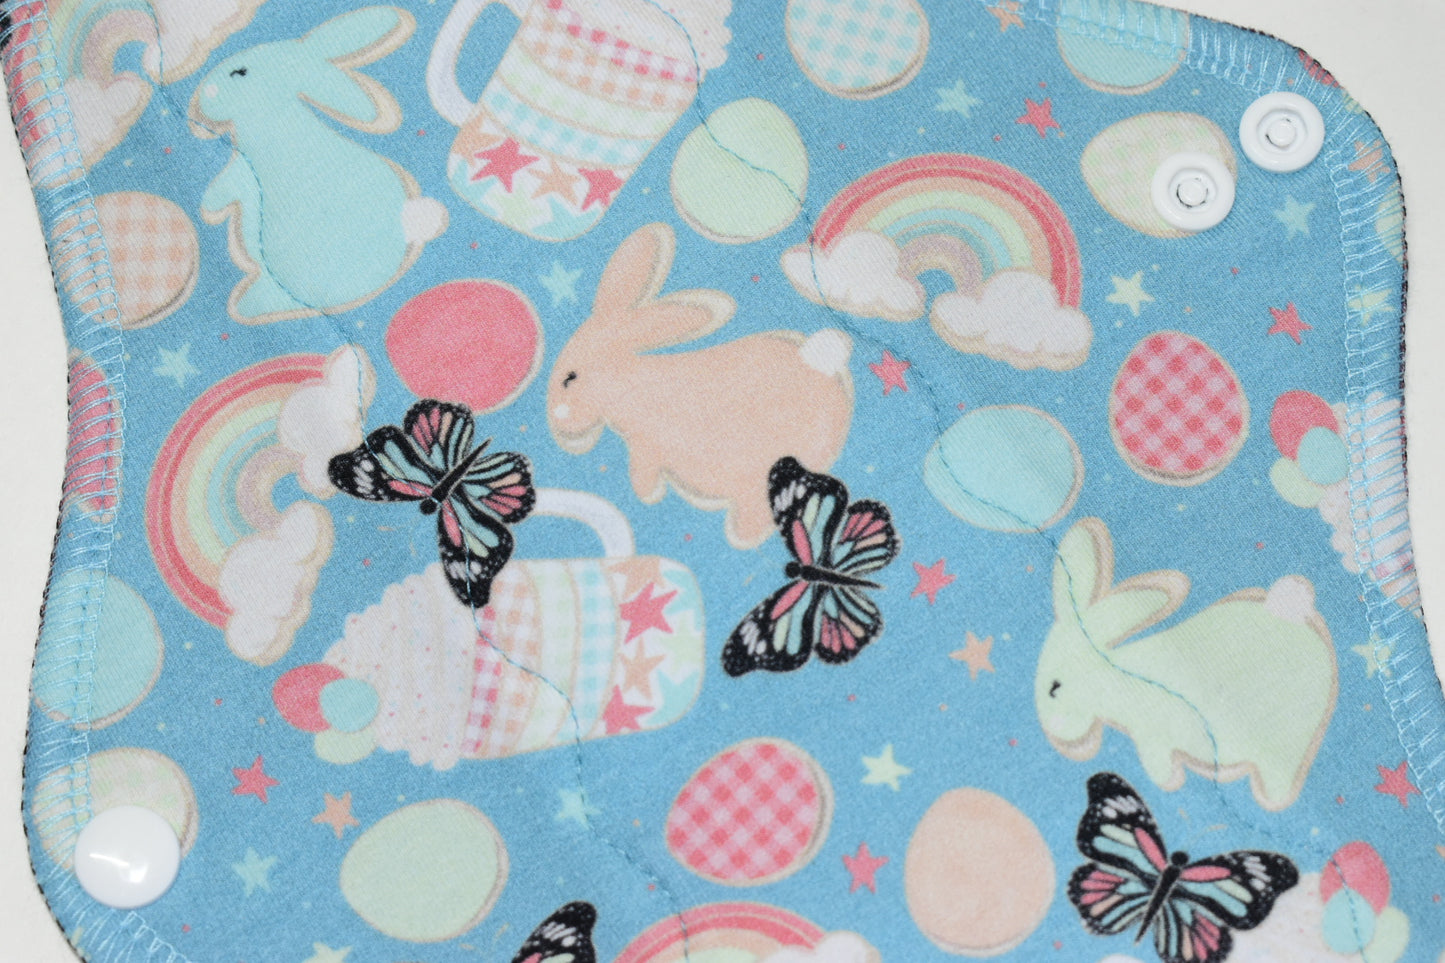 "My Milkshake Brings All The Bunnies To The Yard" Serged Cloth Pad • *New Core Method / NOT HIDDEN CORE* • Ultra Heavy Wide & Thong Options! • Cotton Spandex Topper